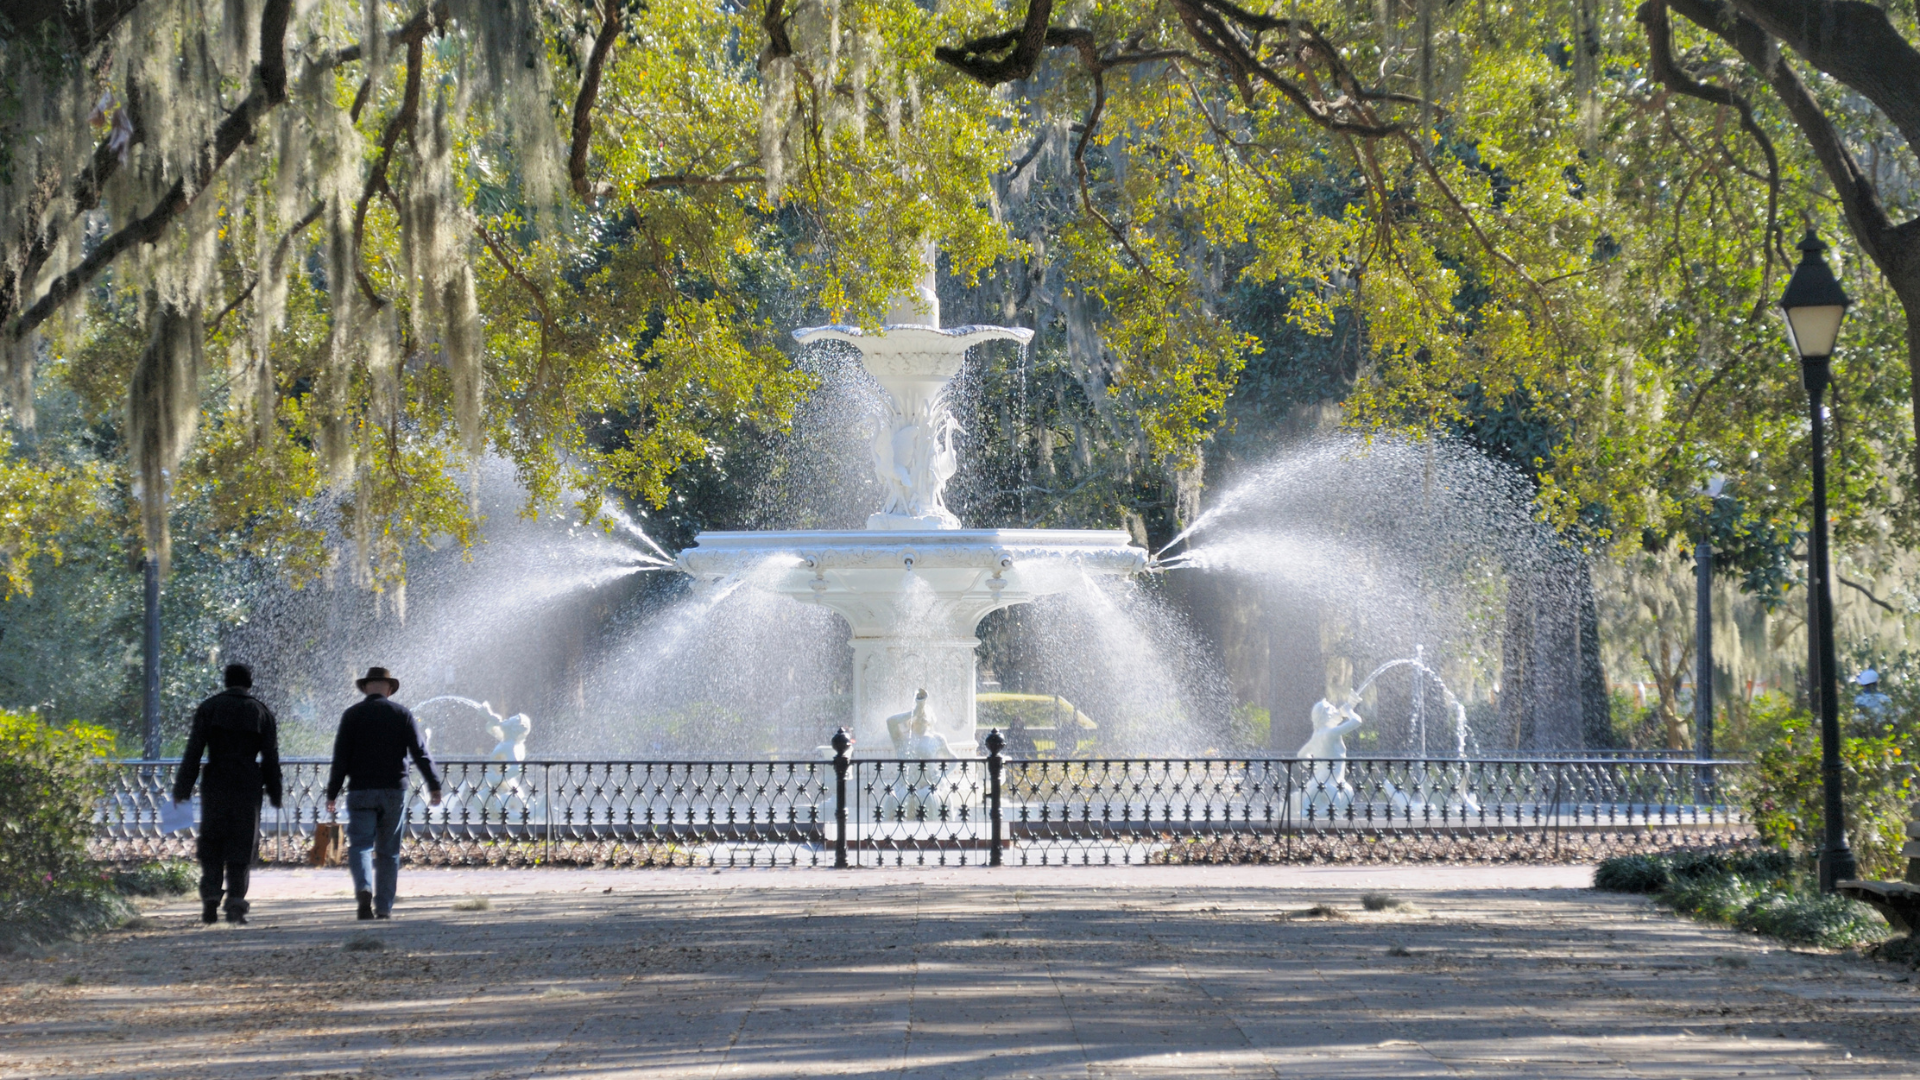 Savannah, Georgia is one of the most walkable cities in the world